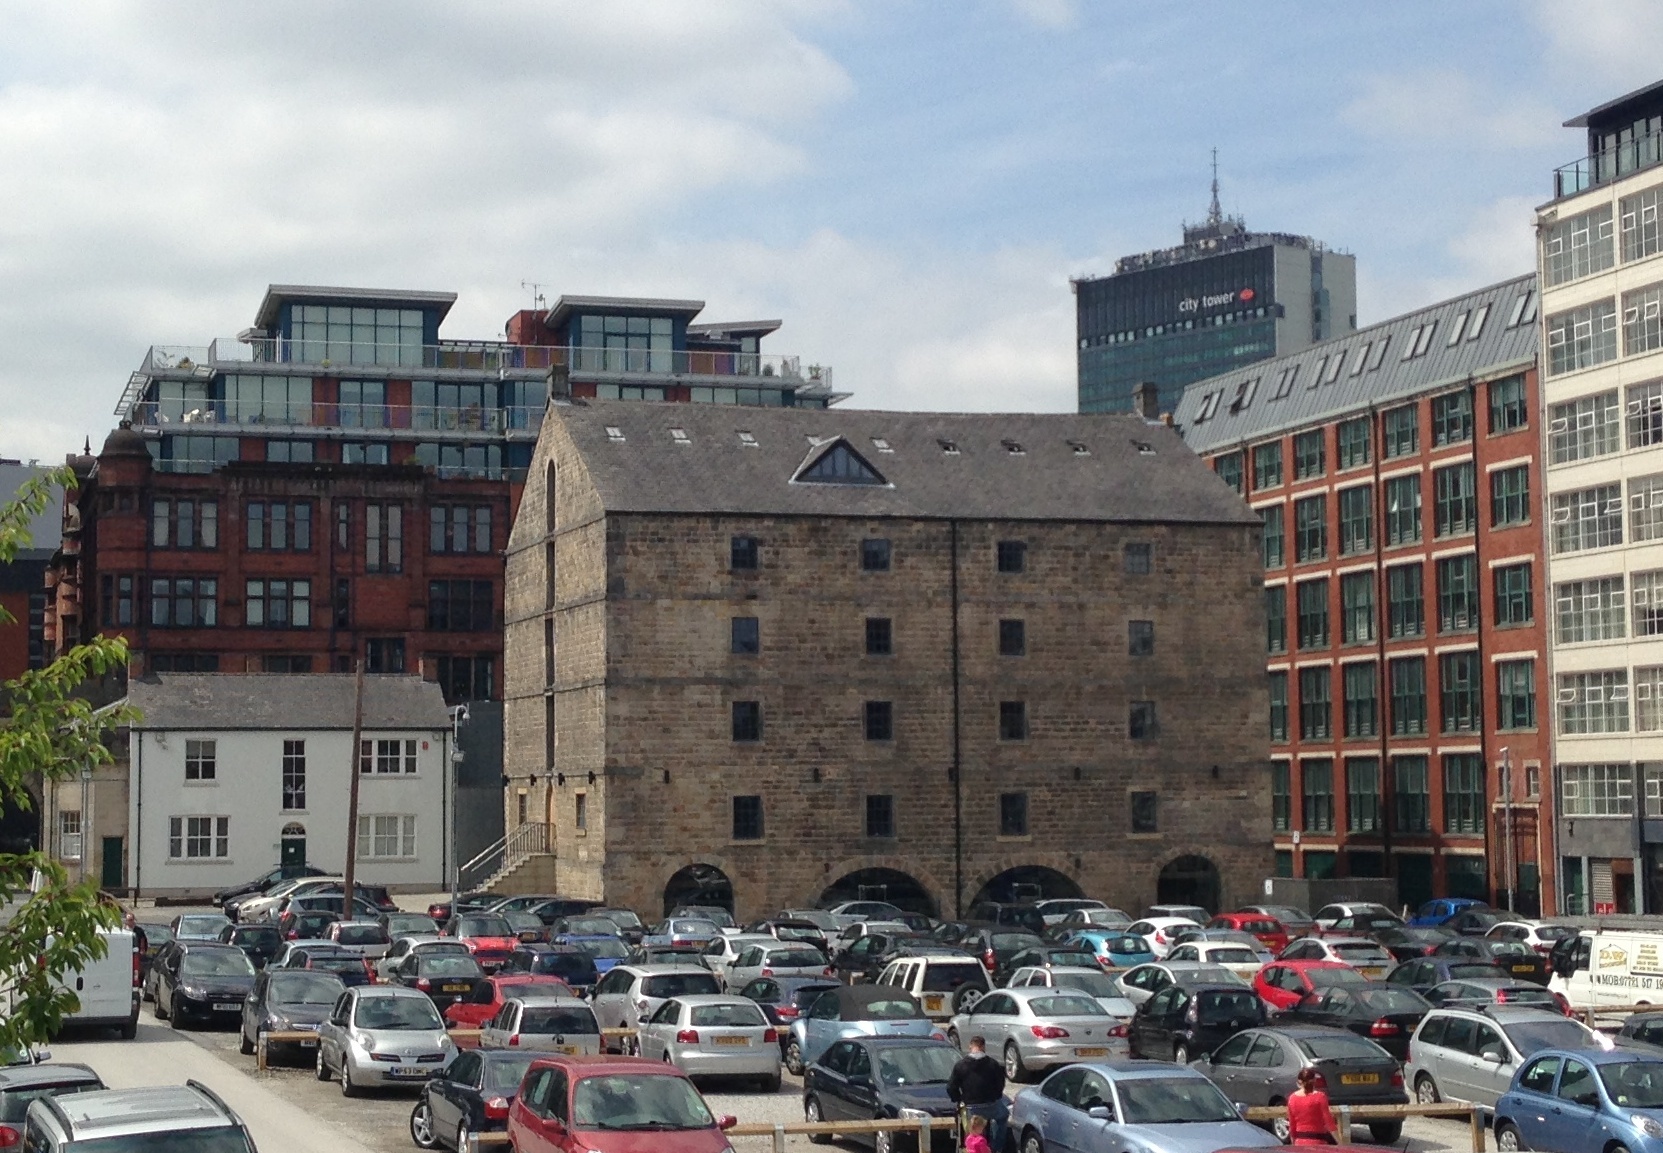 The old stone warehouse all at sea in a car park rather than in water